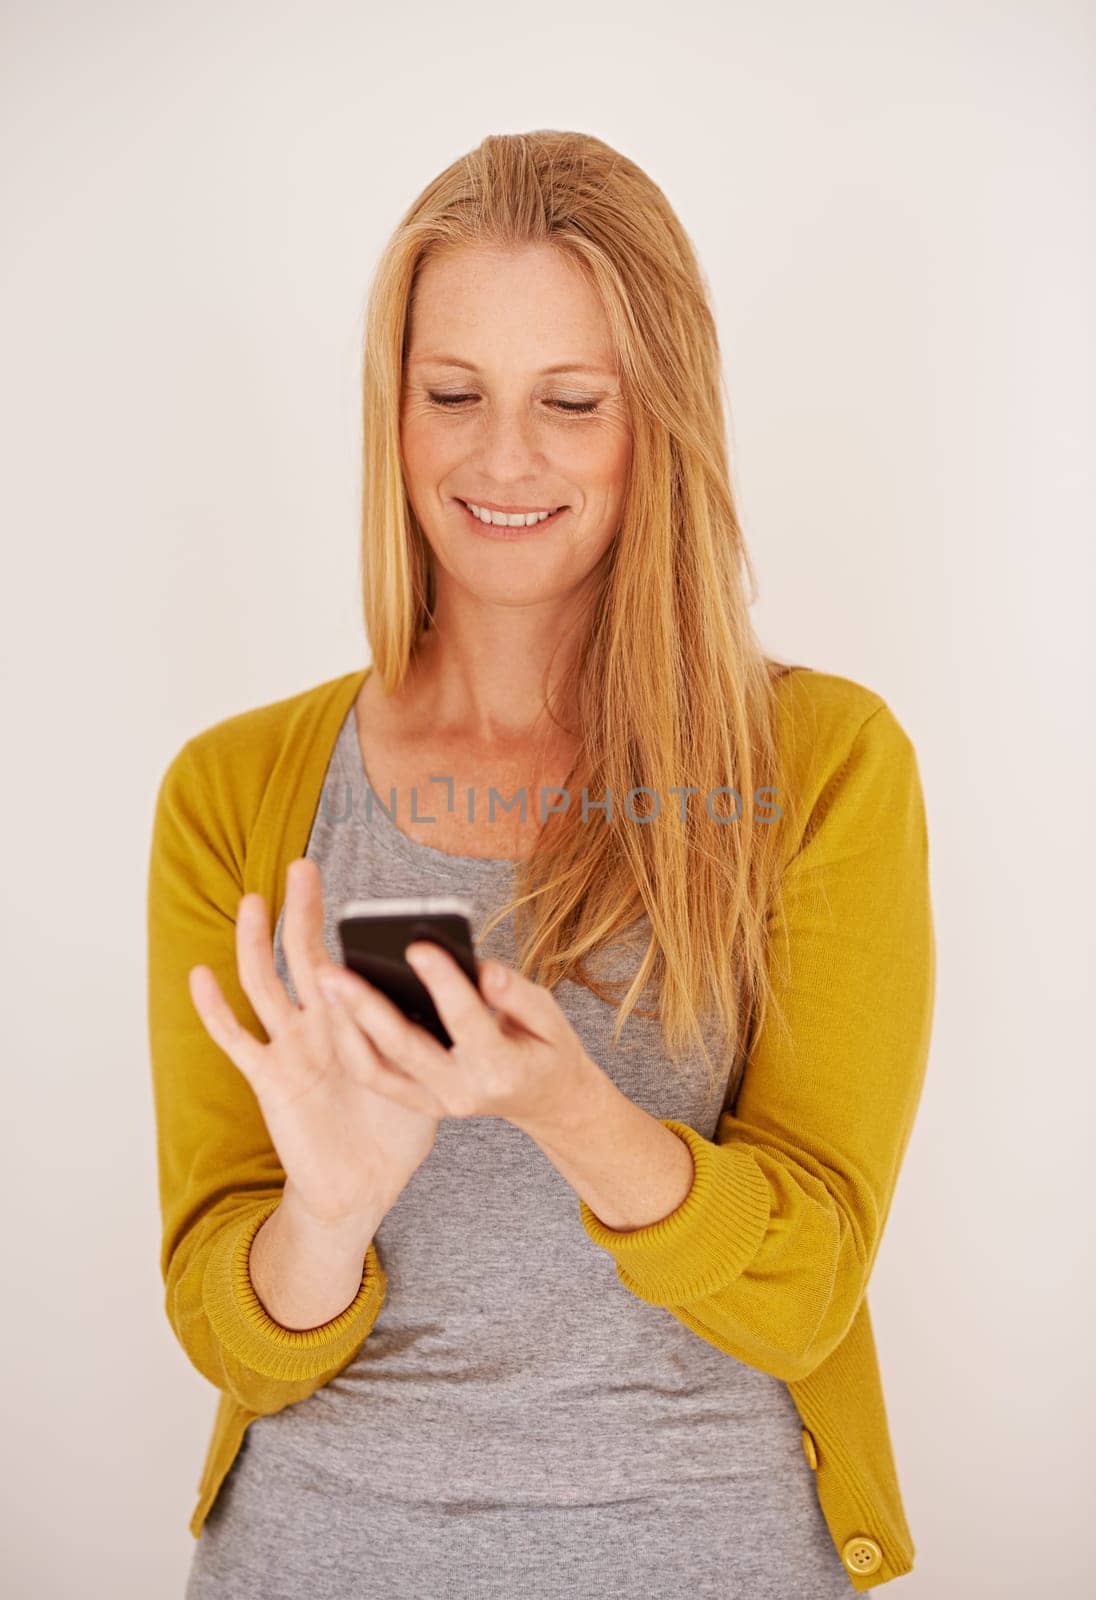 Smile, woman and smartphone for contact, communication and texting with technology isolated on white background. Happy, female person and mobile phone for connectivity, internet and app in studio.